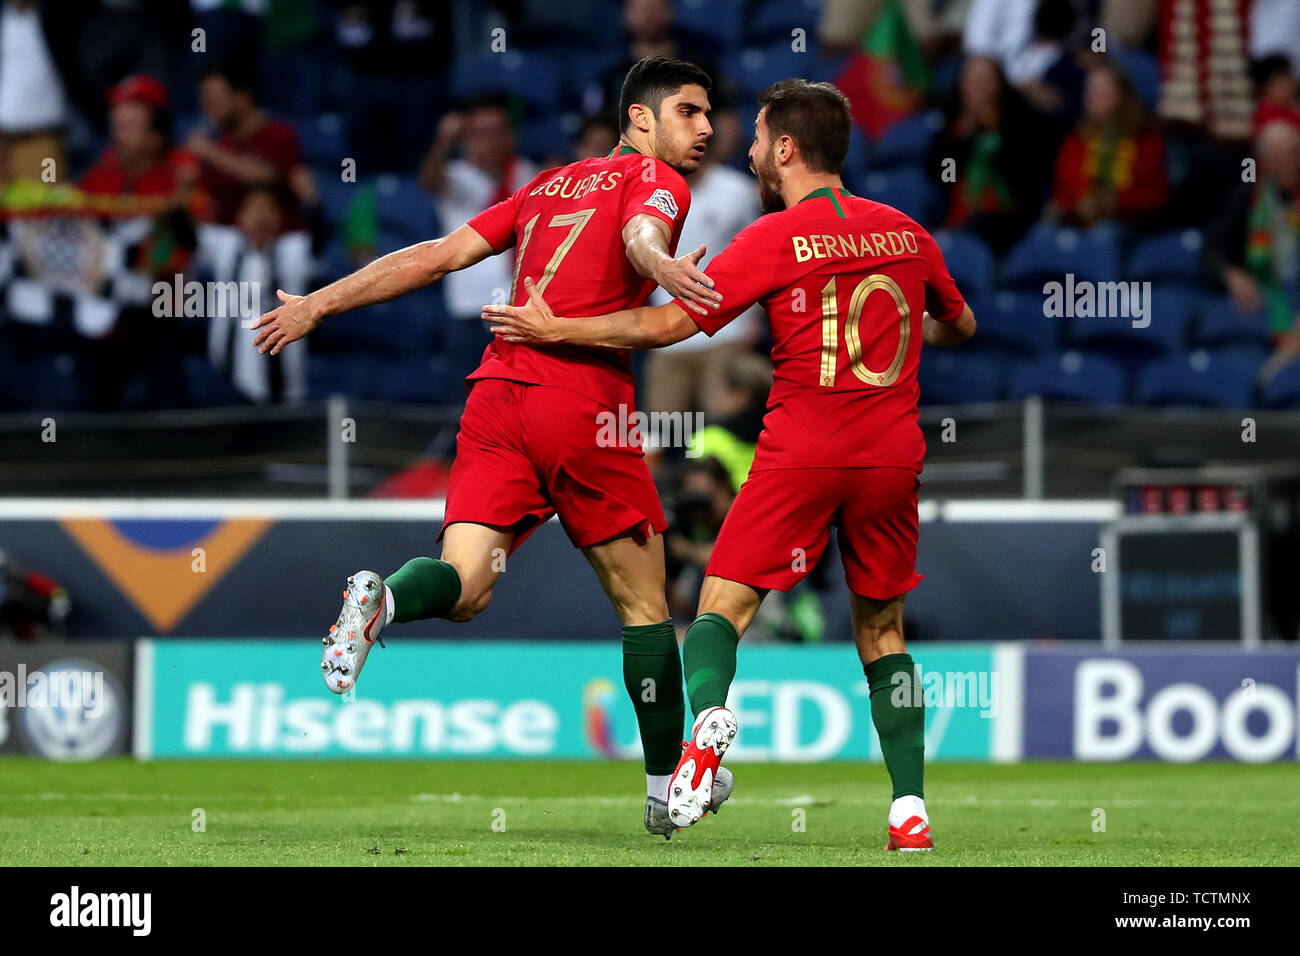 Porto, Portugal. 9th June, 2019. Goncalo Guedes (L) of Portugal celebrates with his teammate Bernardo Silva after scoring a goal during the UEFA Nations League Final football match between Portugal and the Netherlands, at the Dragao stadium in Porto, Portugal, on June 9, 2019. Credit: Pedro Fiuza/Xinhua/Alamy Live News Stock Photo